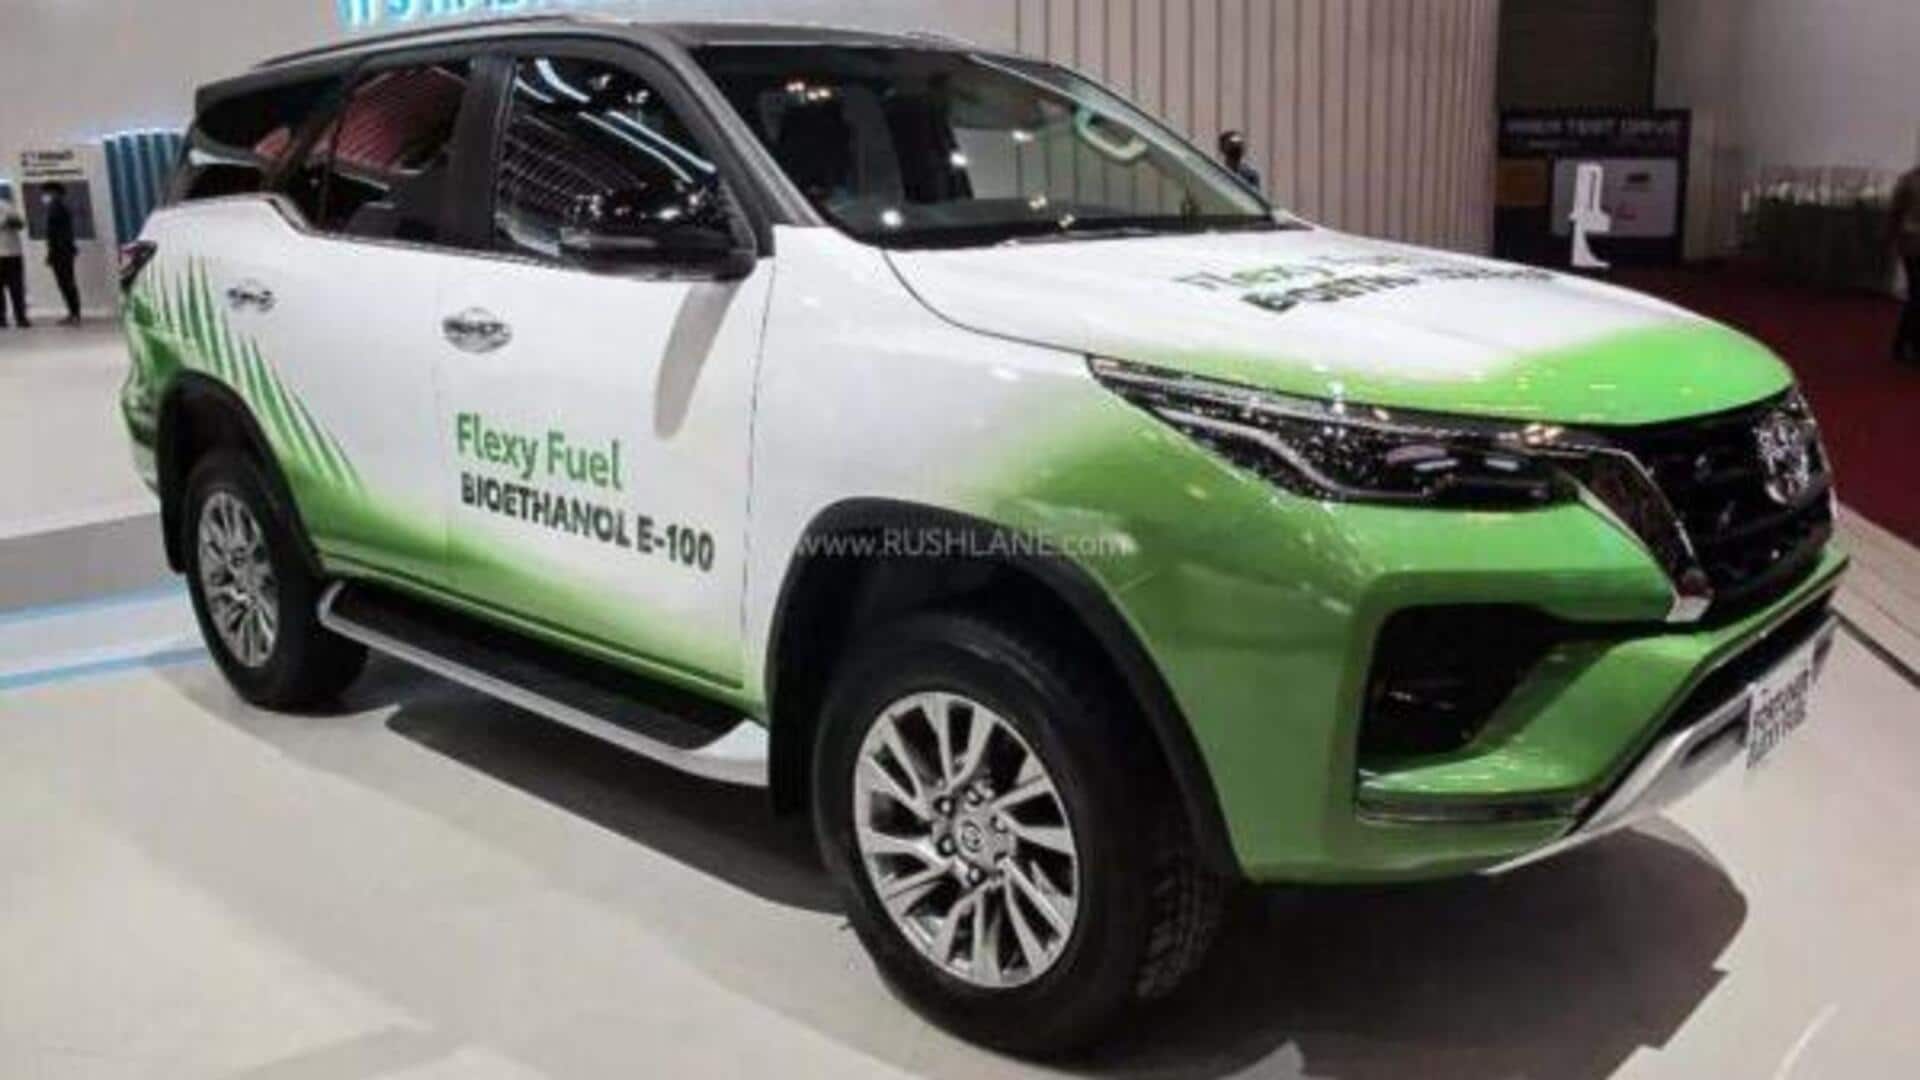 This Toyota Fortuner can run on 100% bioethanol